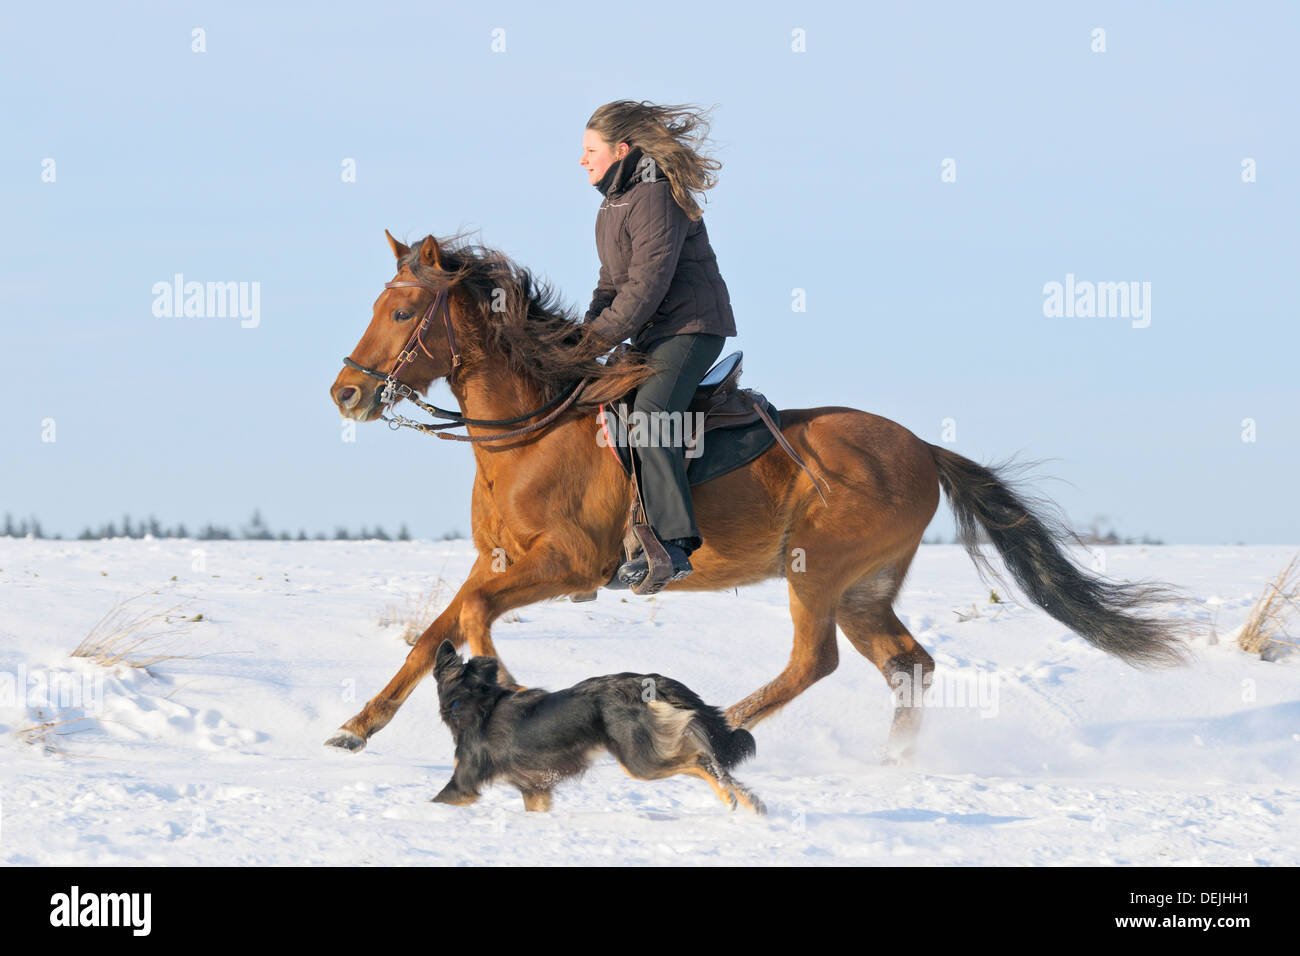 Young rider galloping on back of a Paso Fino horse together with a dog Stock Photo